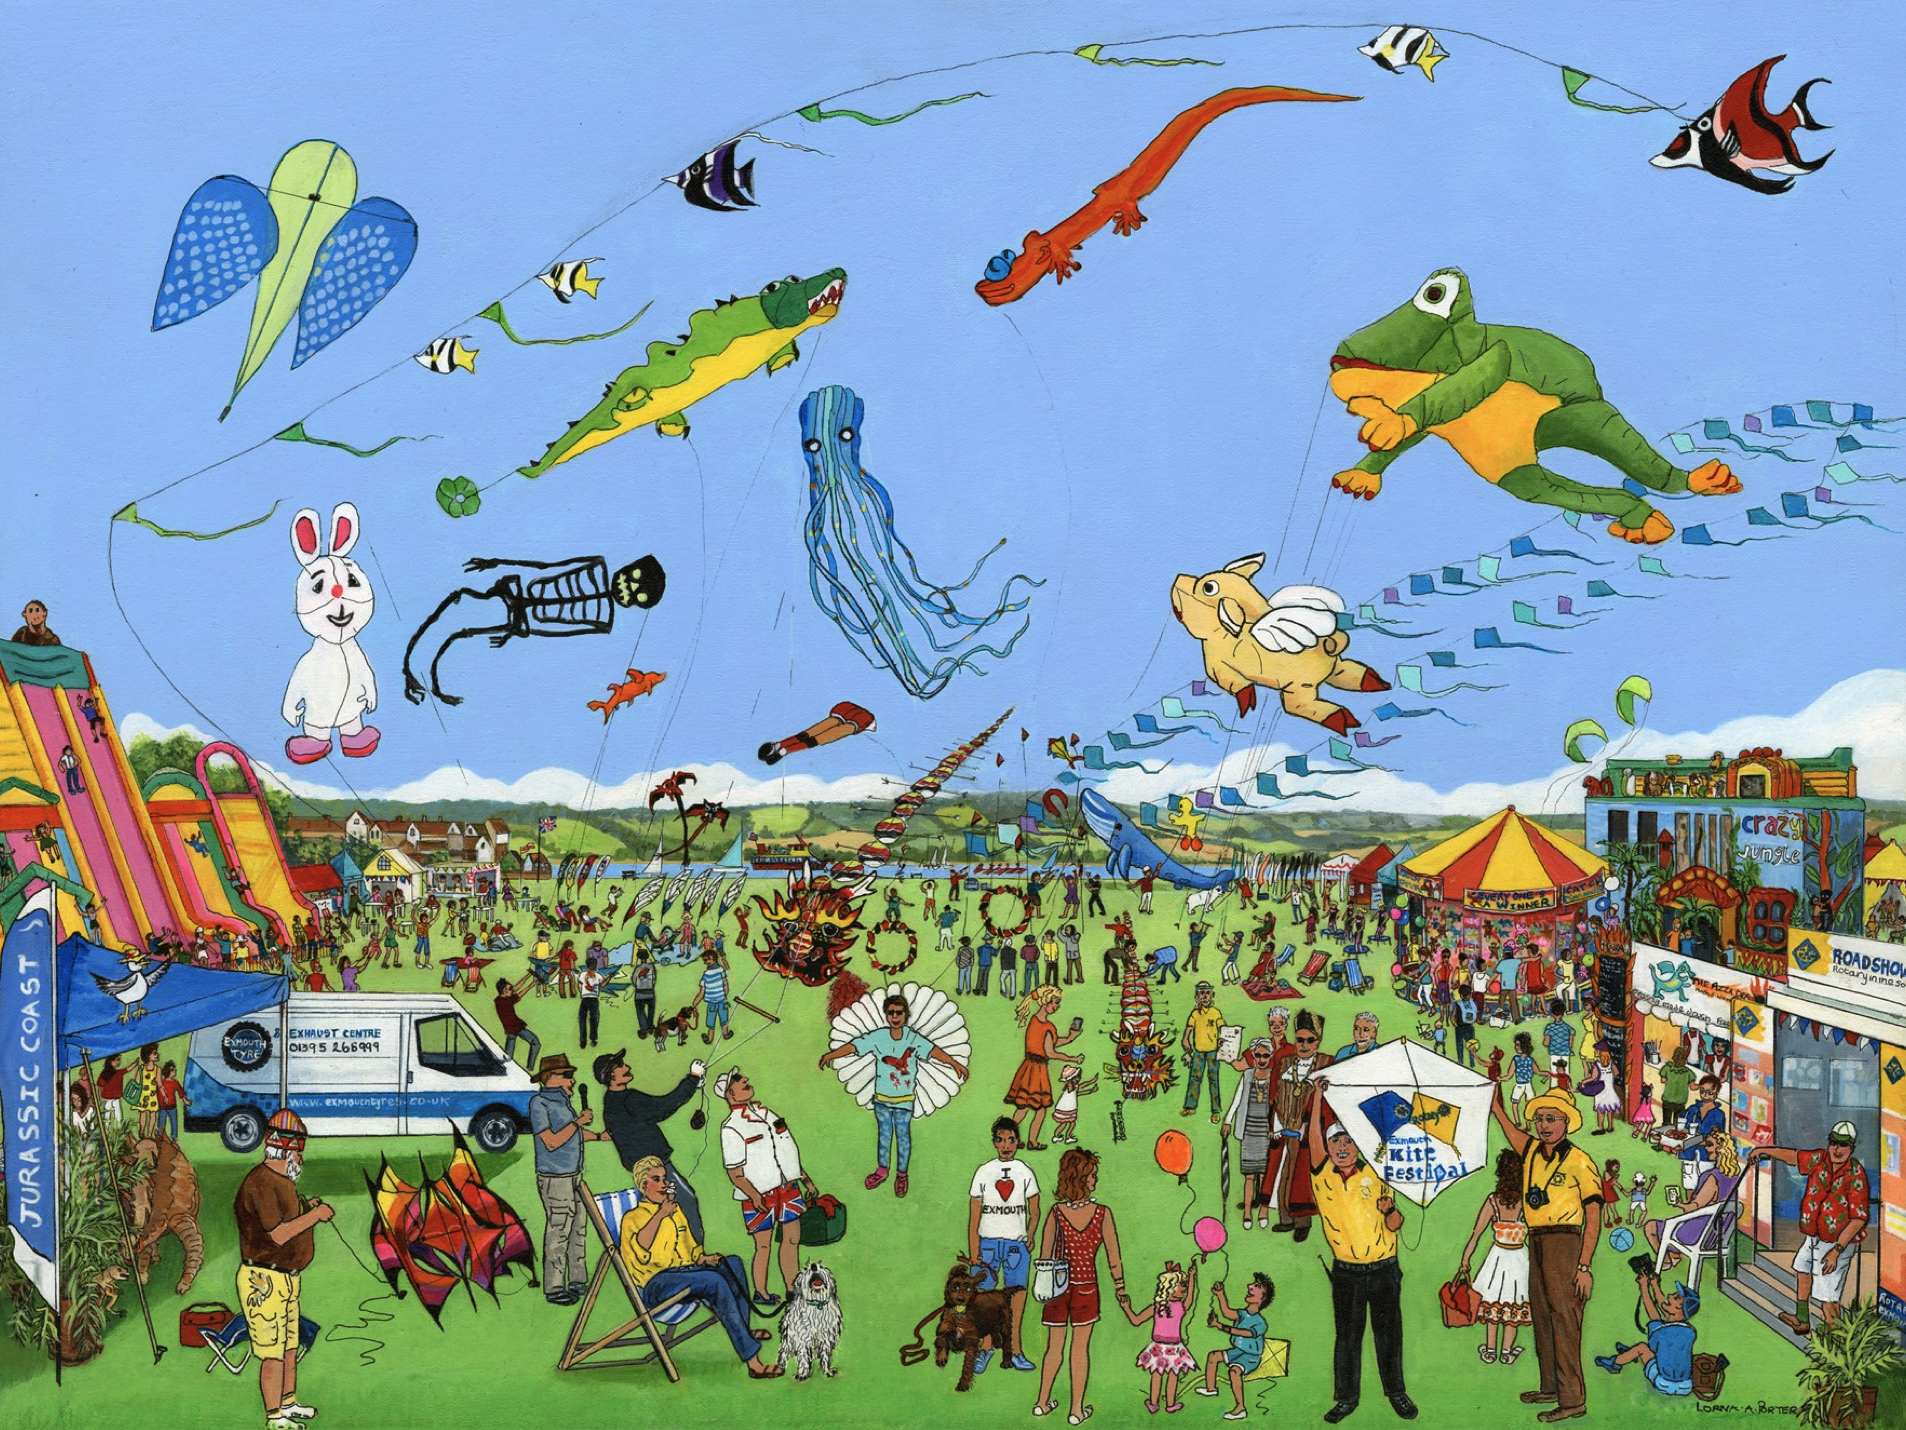 Kite festival painting created by Lorna Porter